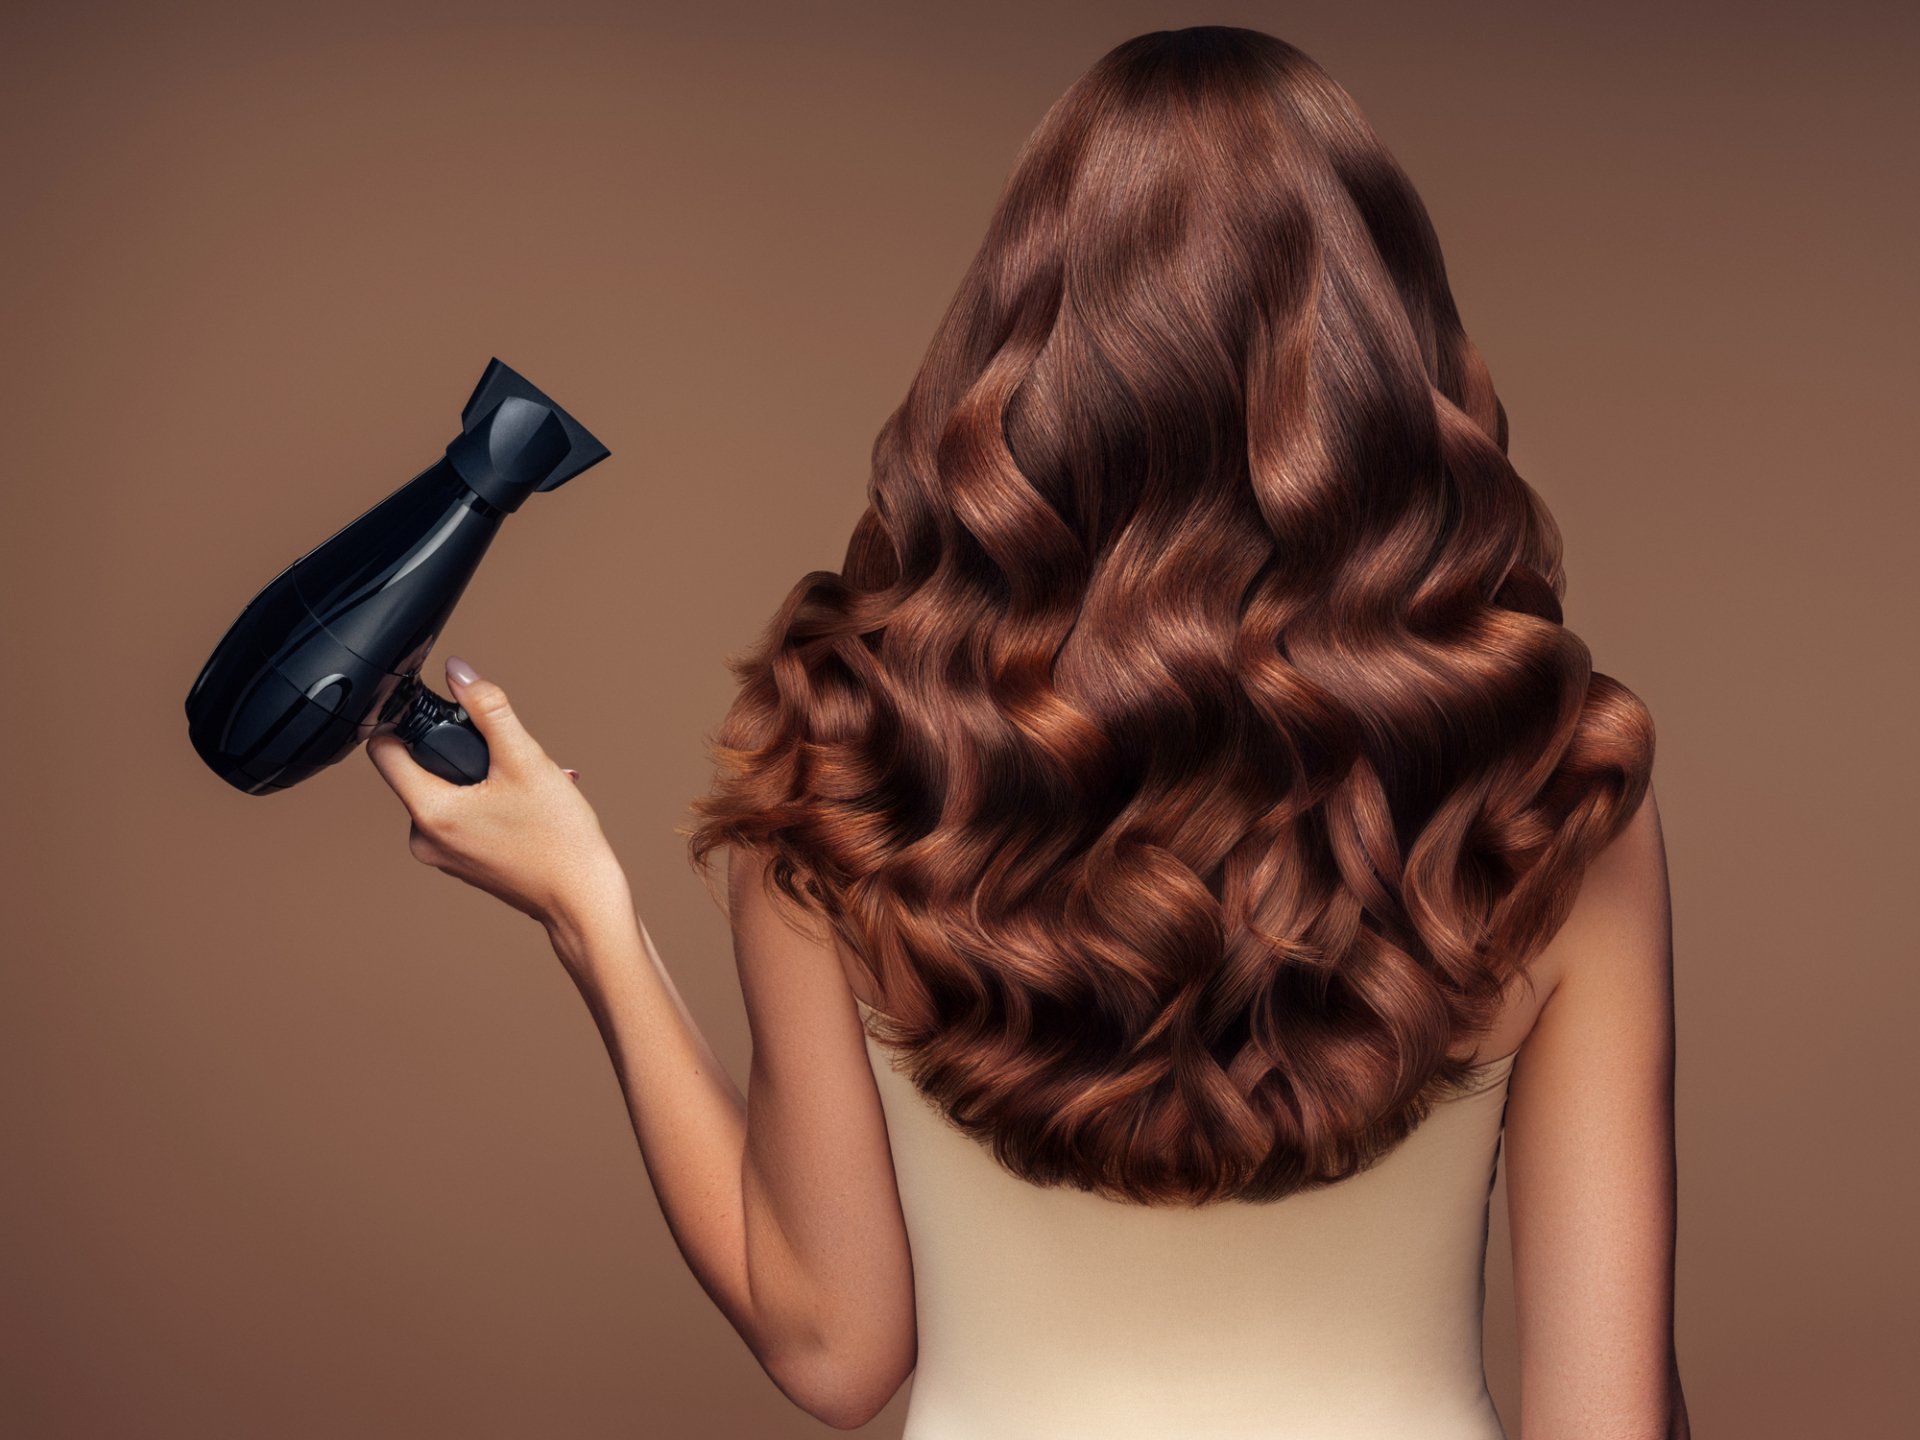 Woman with Brown Hair Holding a Hair Dryer — Marco Island, FL — Look Hair Nails